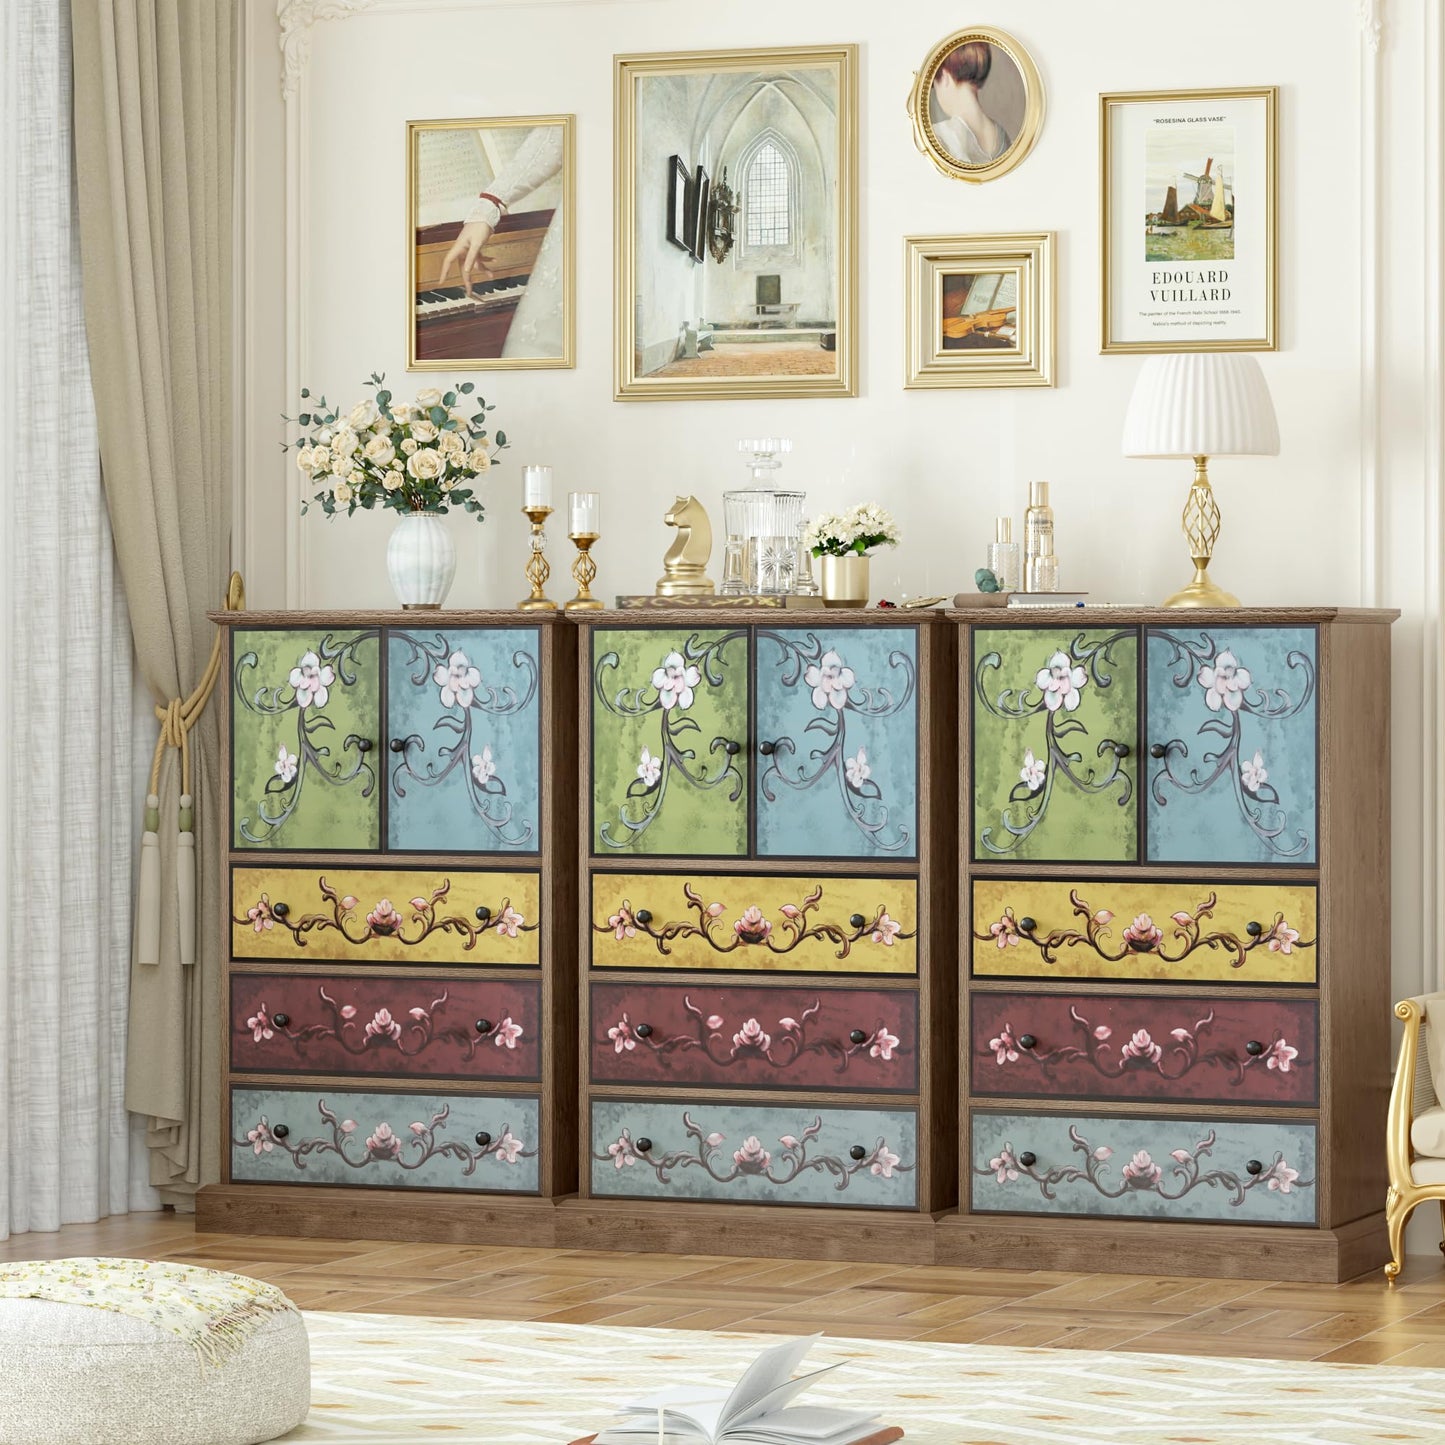 finetones Wood Dresser Chest of Drawers, Tall Dresser Boho Dresser with Drawers and Doors, 16.1D x 23.6W 42.3H Inch Wood Dresser Accent Dresser for Home Office